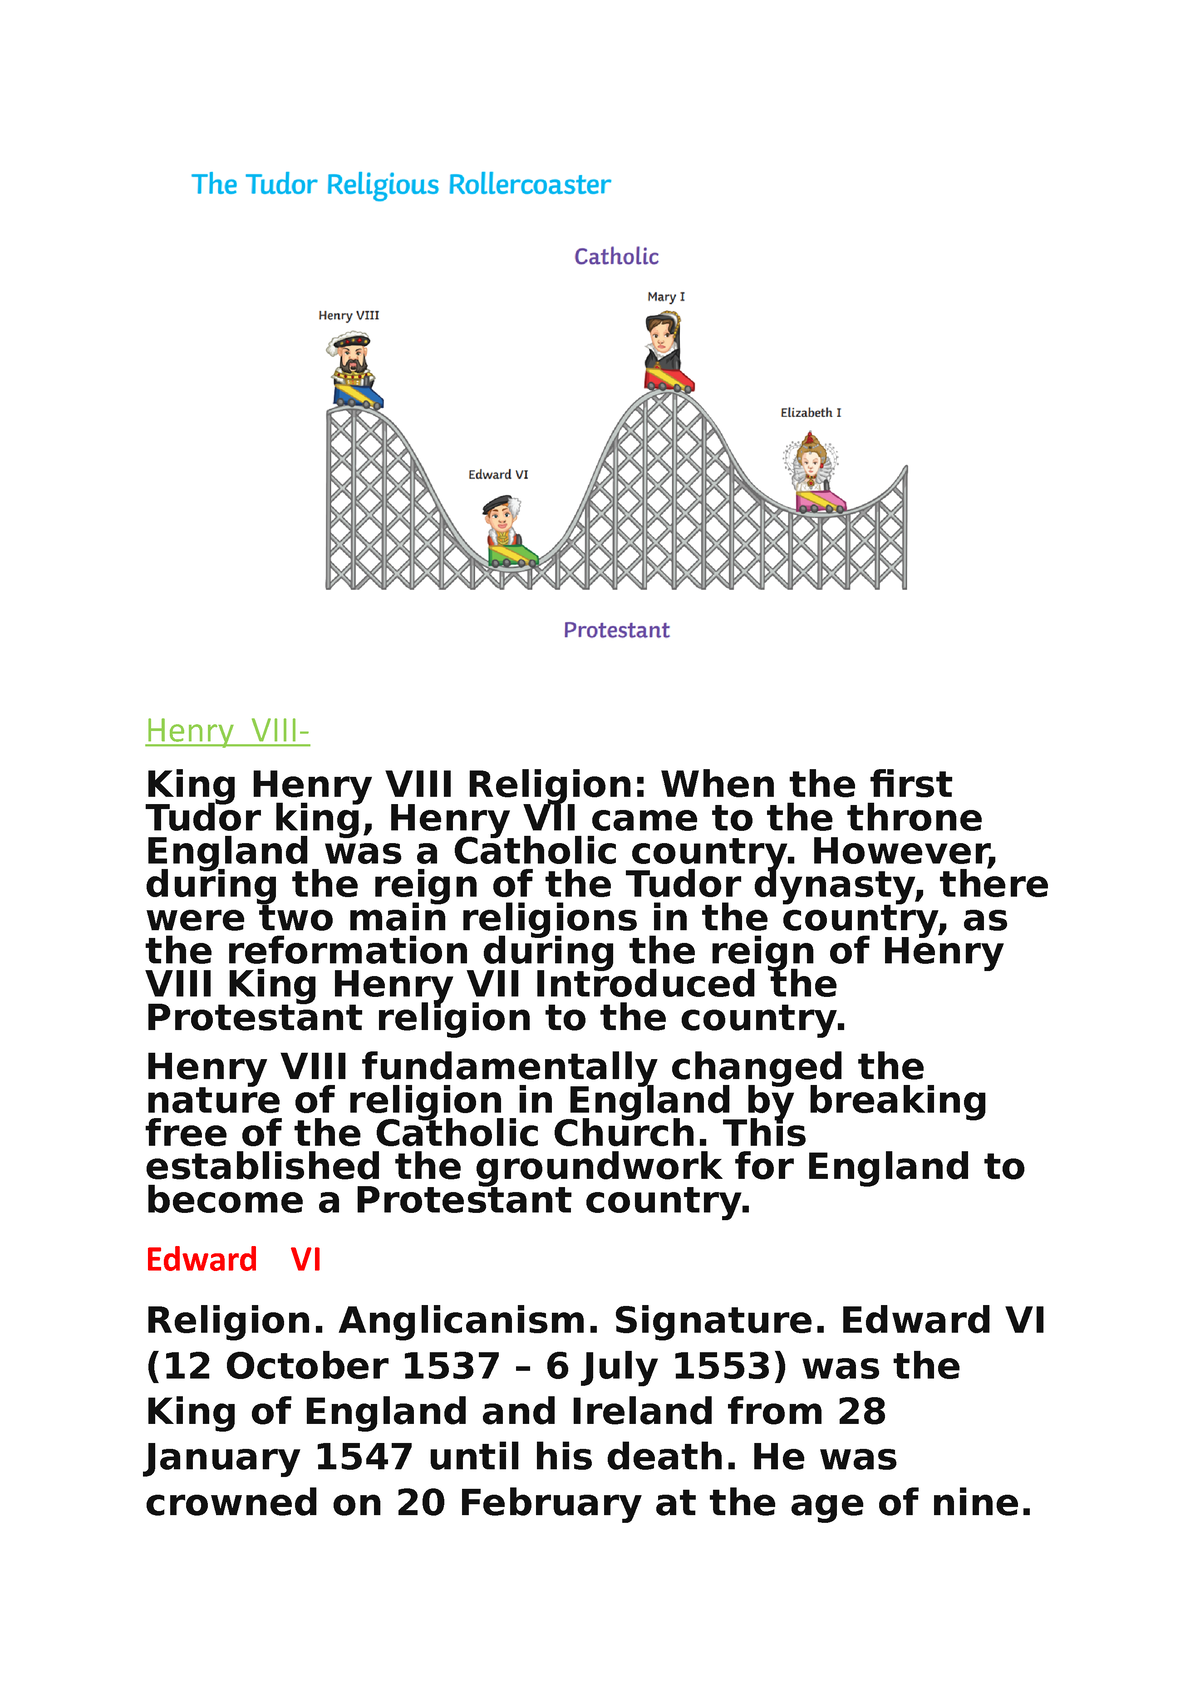 henry viii religion essay questions